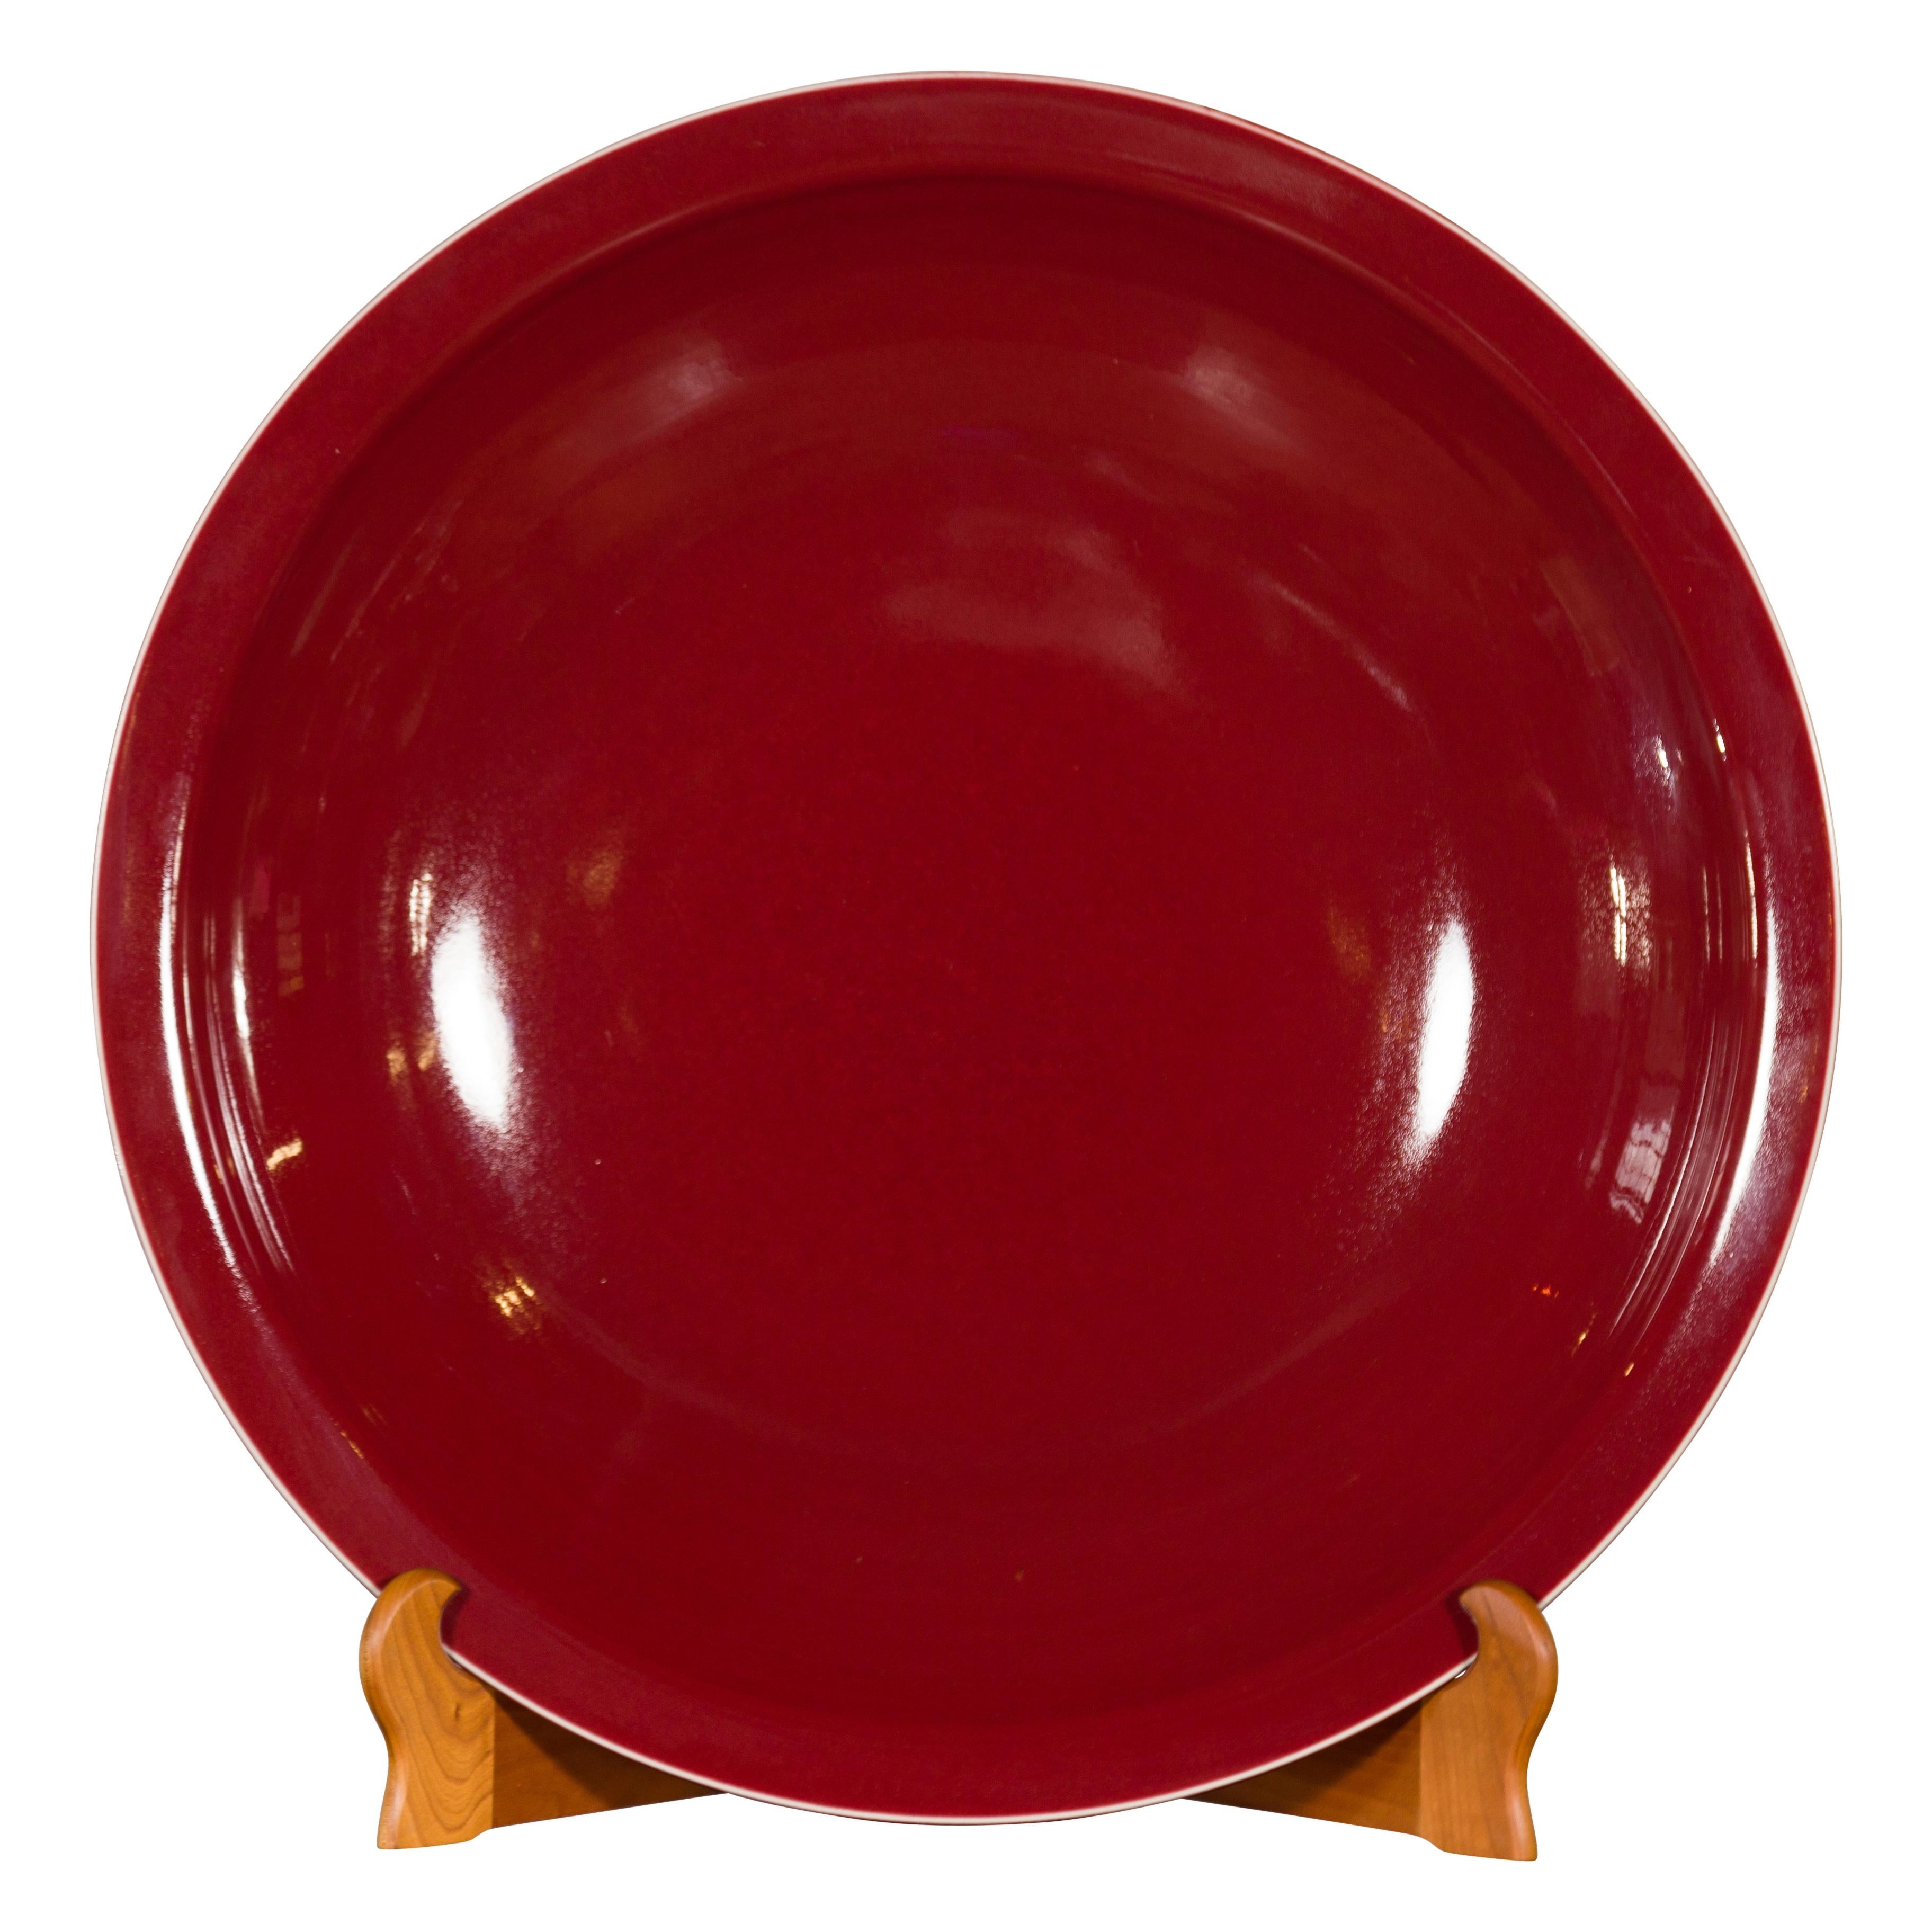 A large Chinese vintage porcelain platter from the mid-20th century, with oxblood color. Created in China during the mid-century period, this porcelain platter captures our attention with its elegant lines and deep oxblood color. Accented with a